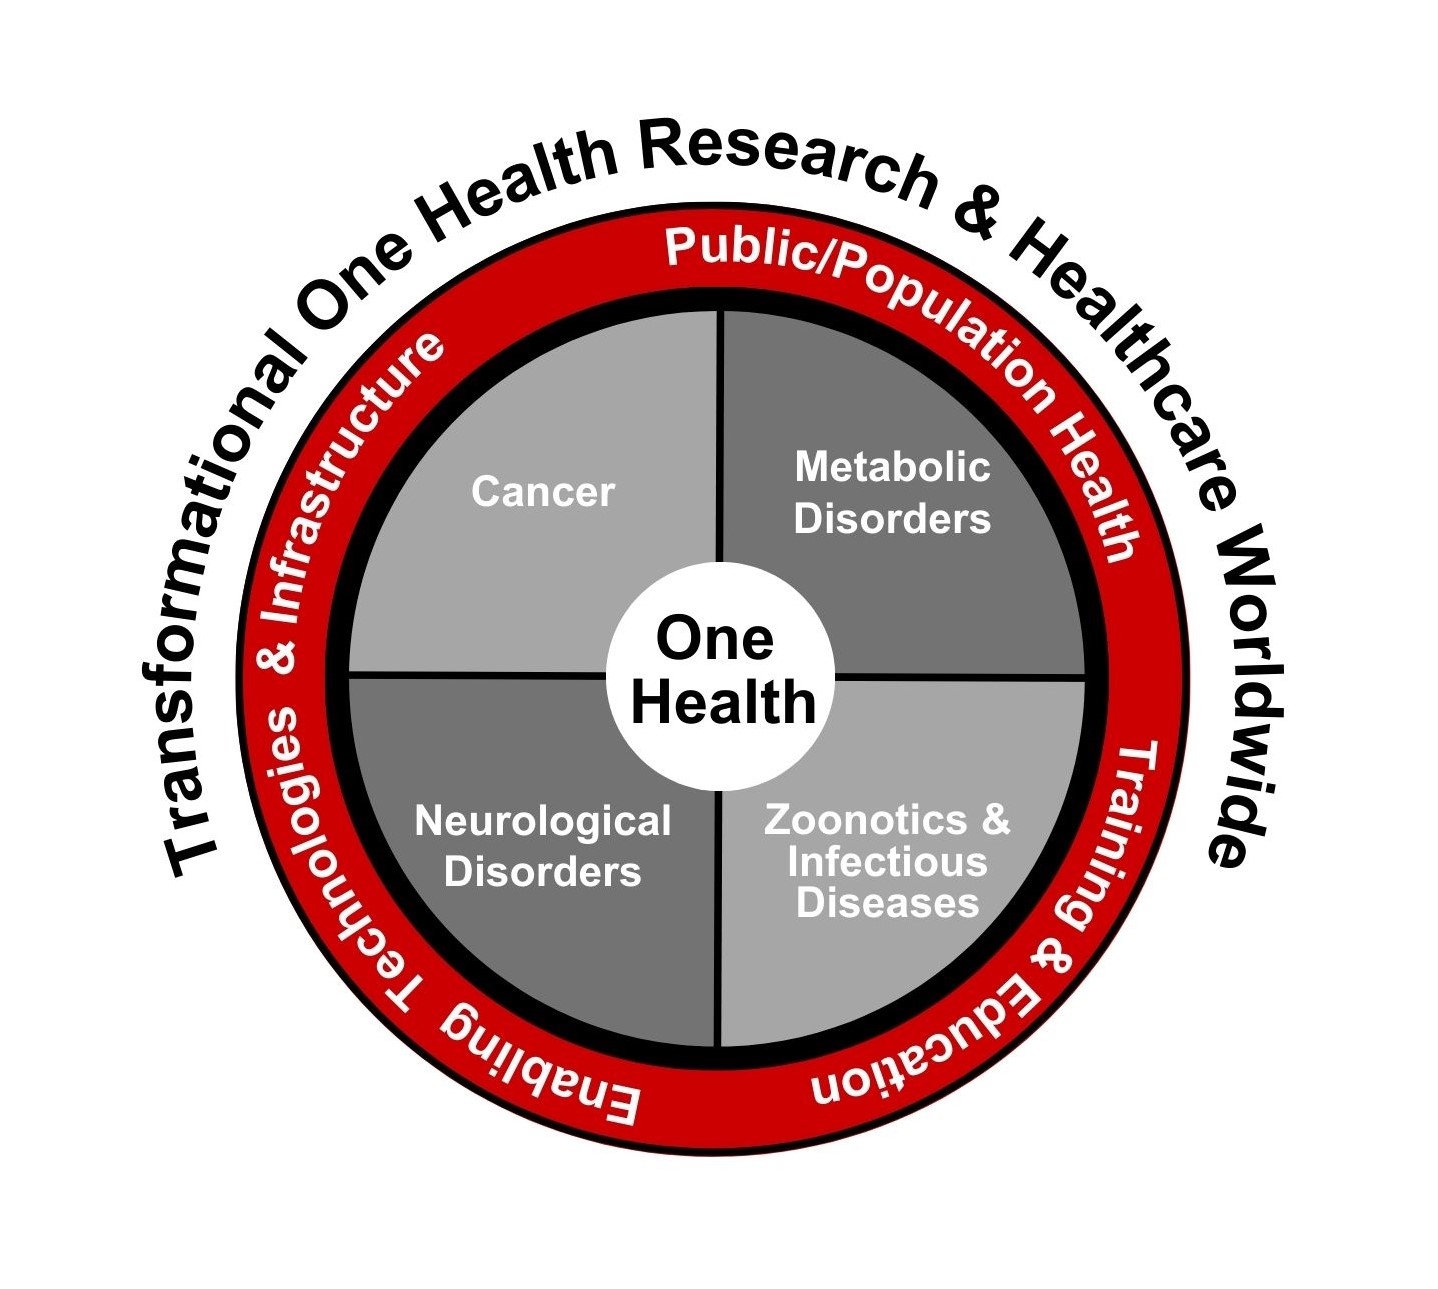 transformational one health research and healthcare worldwide